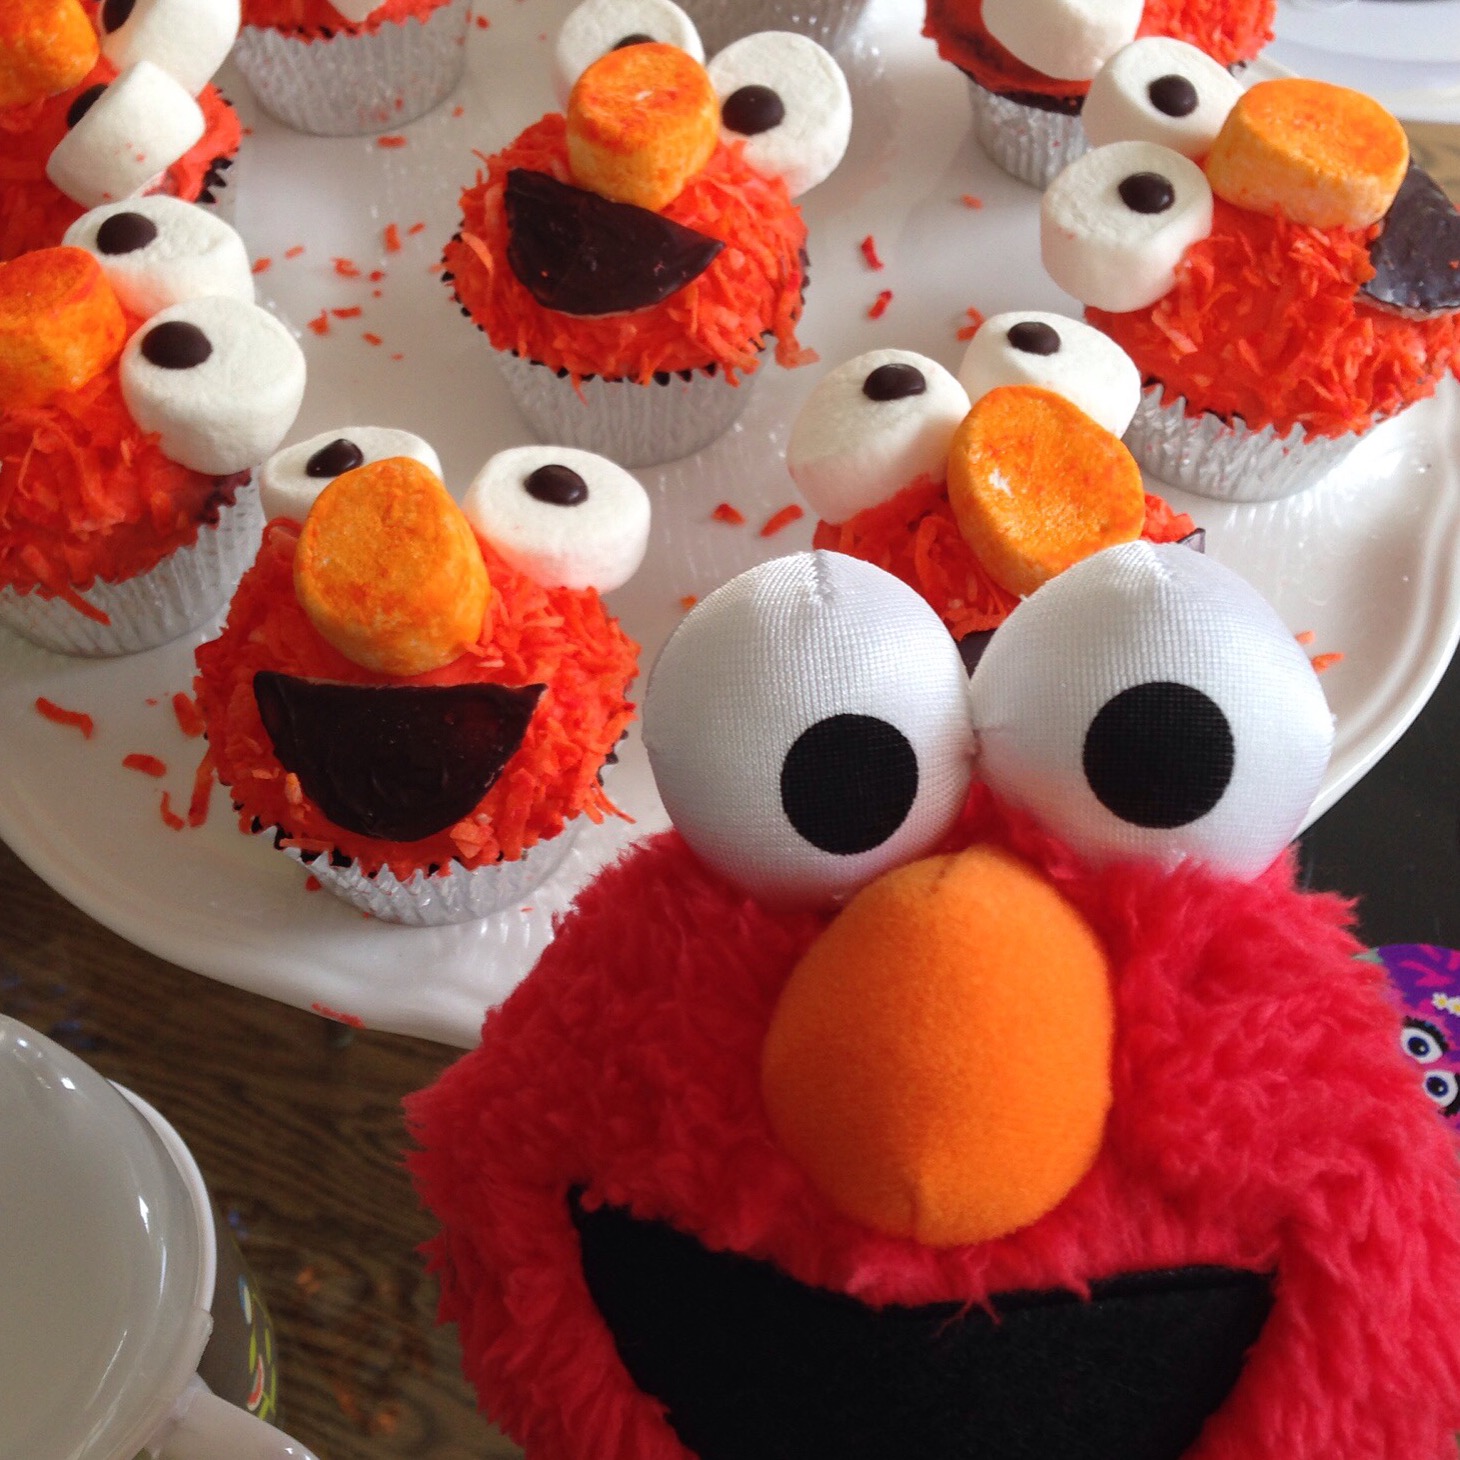 These Elmo cupcakes are made with marshmallows, coconut, chocolate, and marzipan.